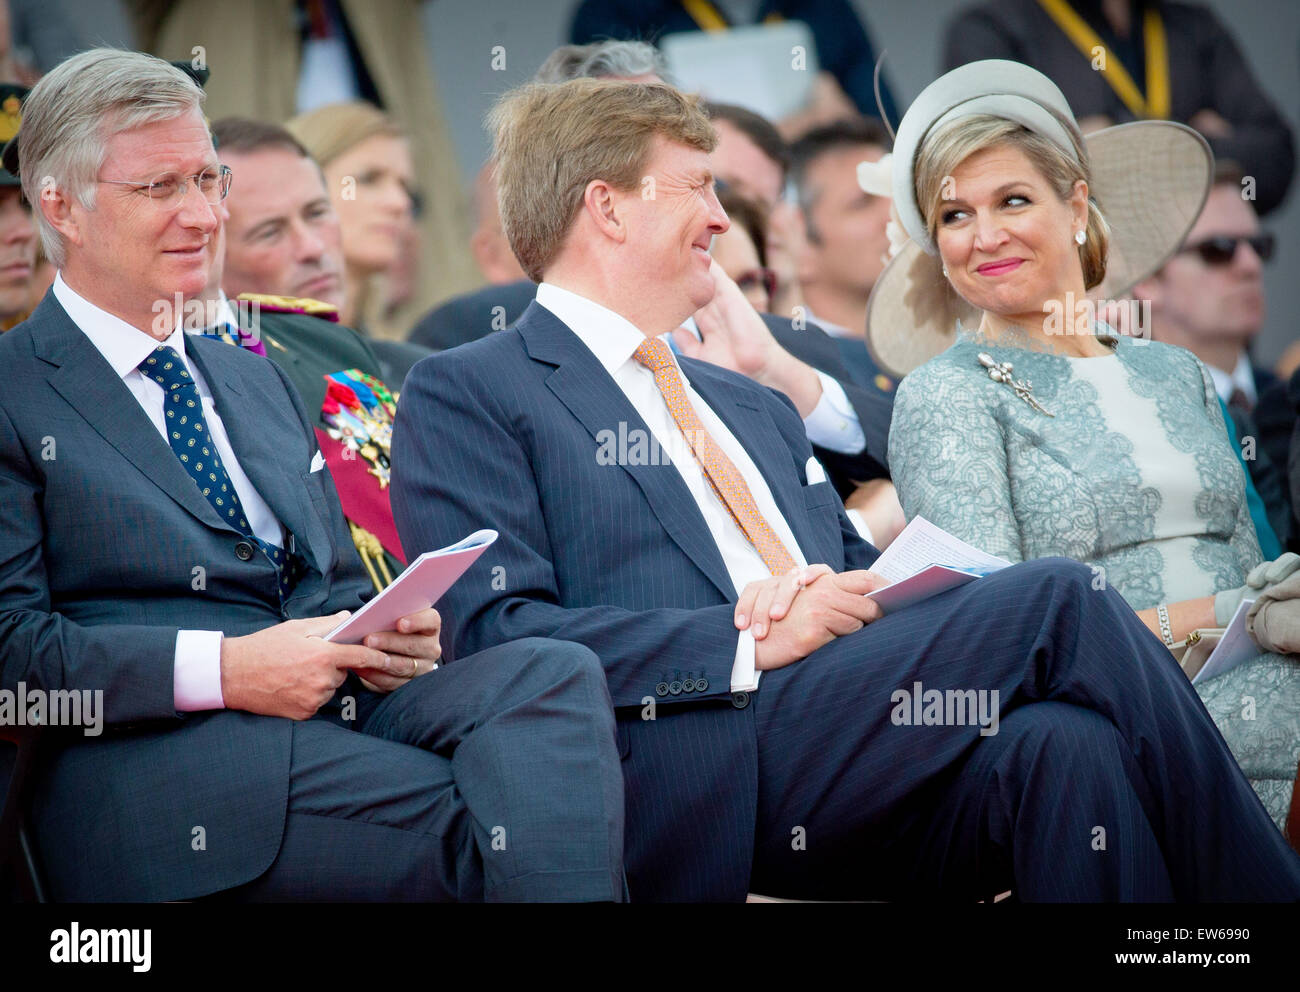 King Willem-Alexander (C) and Queen Maxima of The Netherlands, King Philippe of Belgium during official celebration as part of the bicentennial celebrations for the Battle of Waterloo, Belgium 18 June 2015. On 19 and 20 June 2015, some 5000 re-enactors, 3 Stock Photo